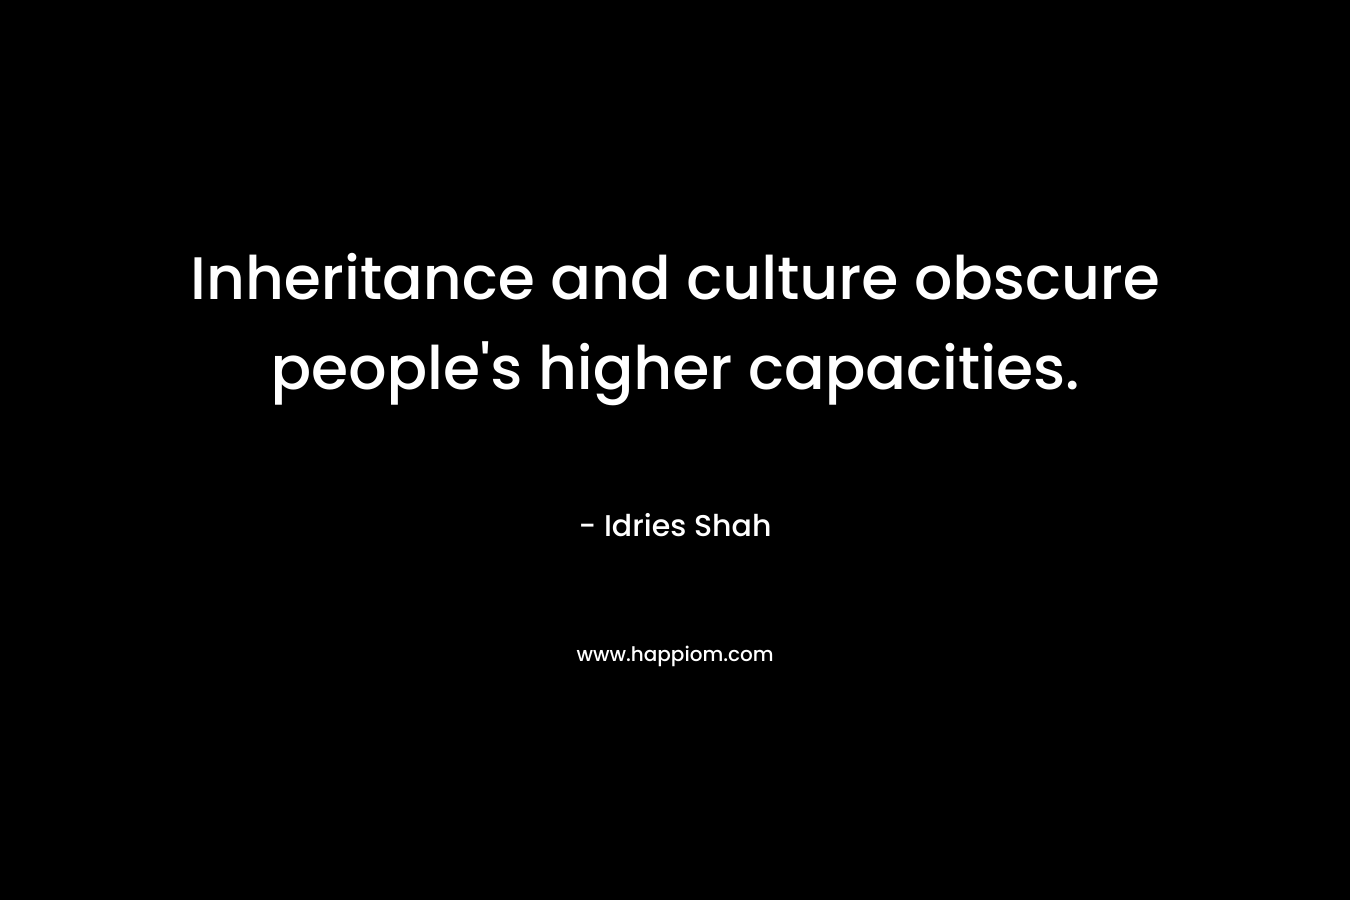 Inheritance and culture obscure people’s higher capacities. – Idries Shah